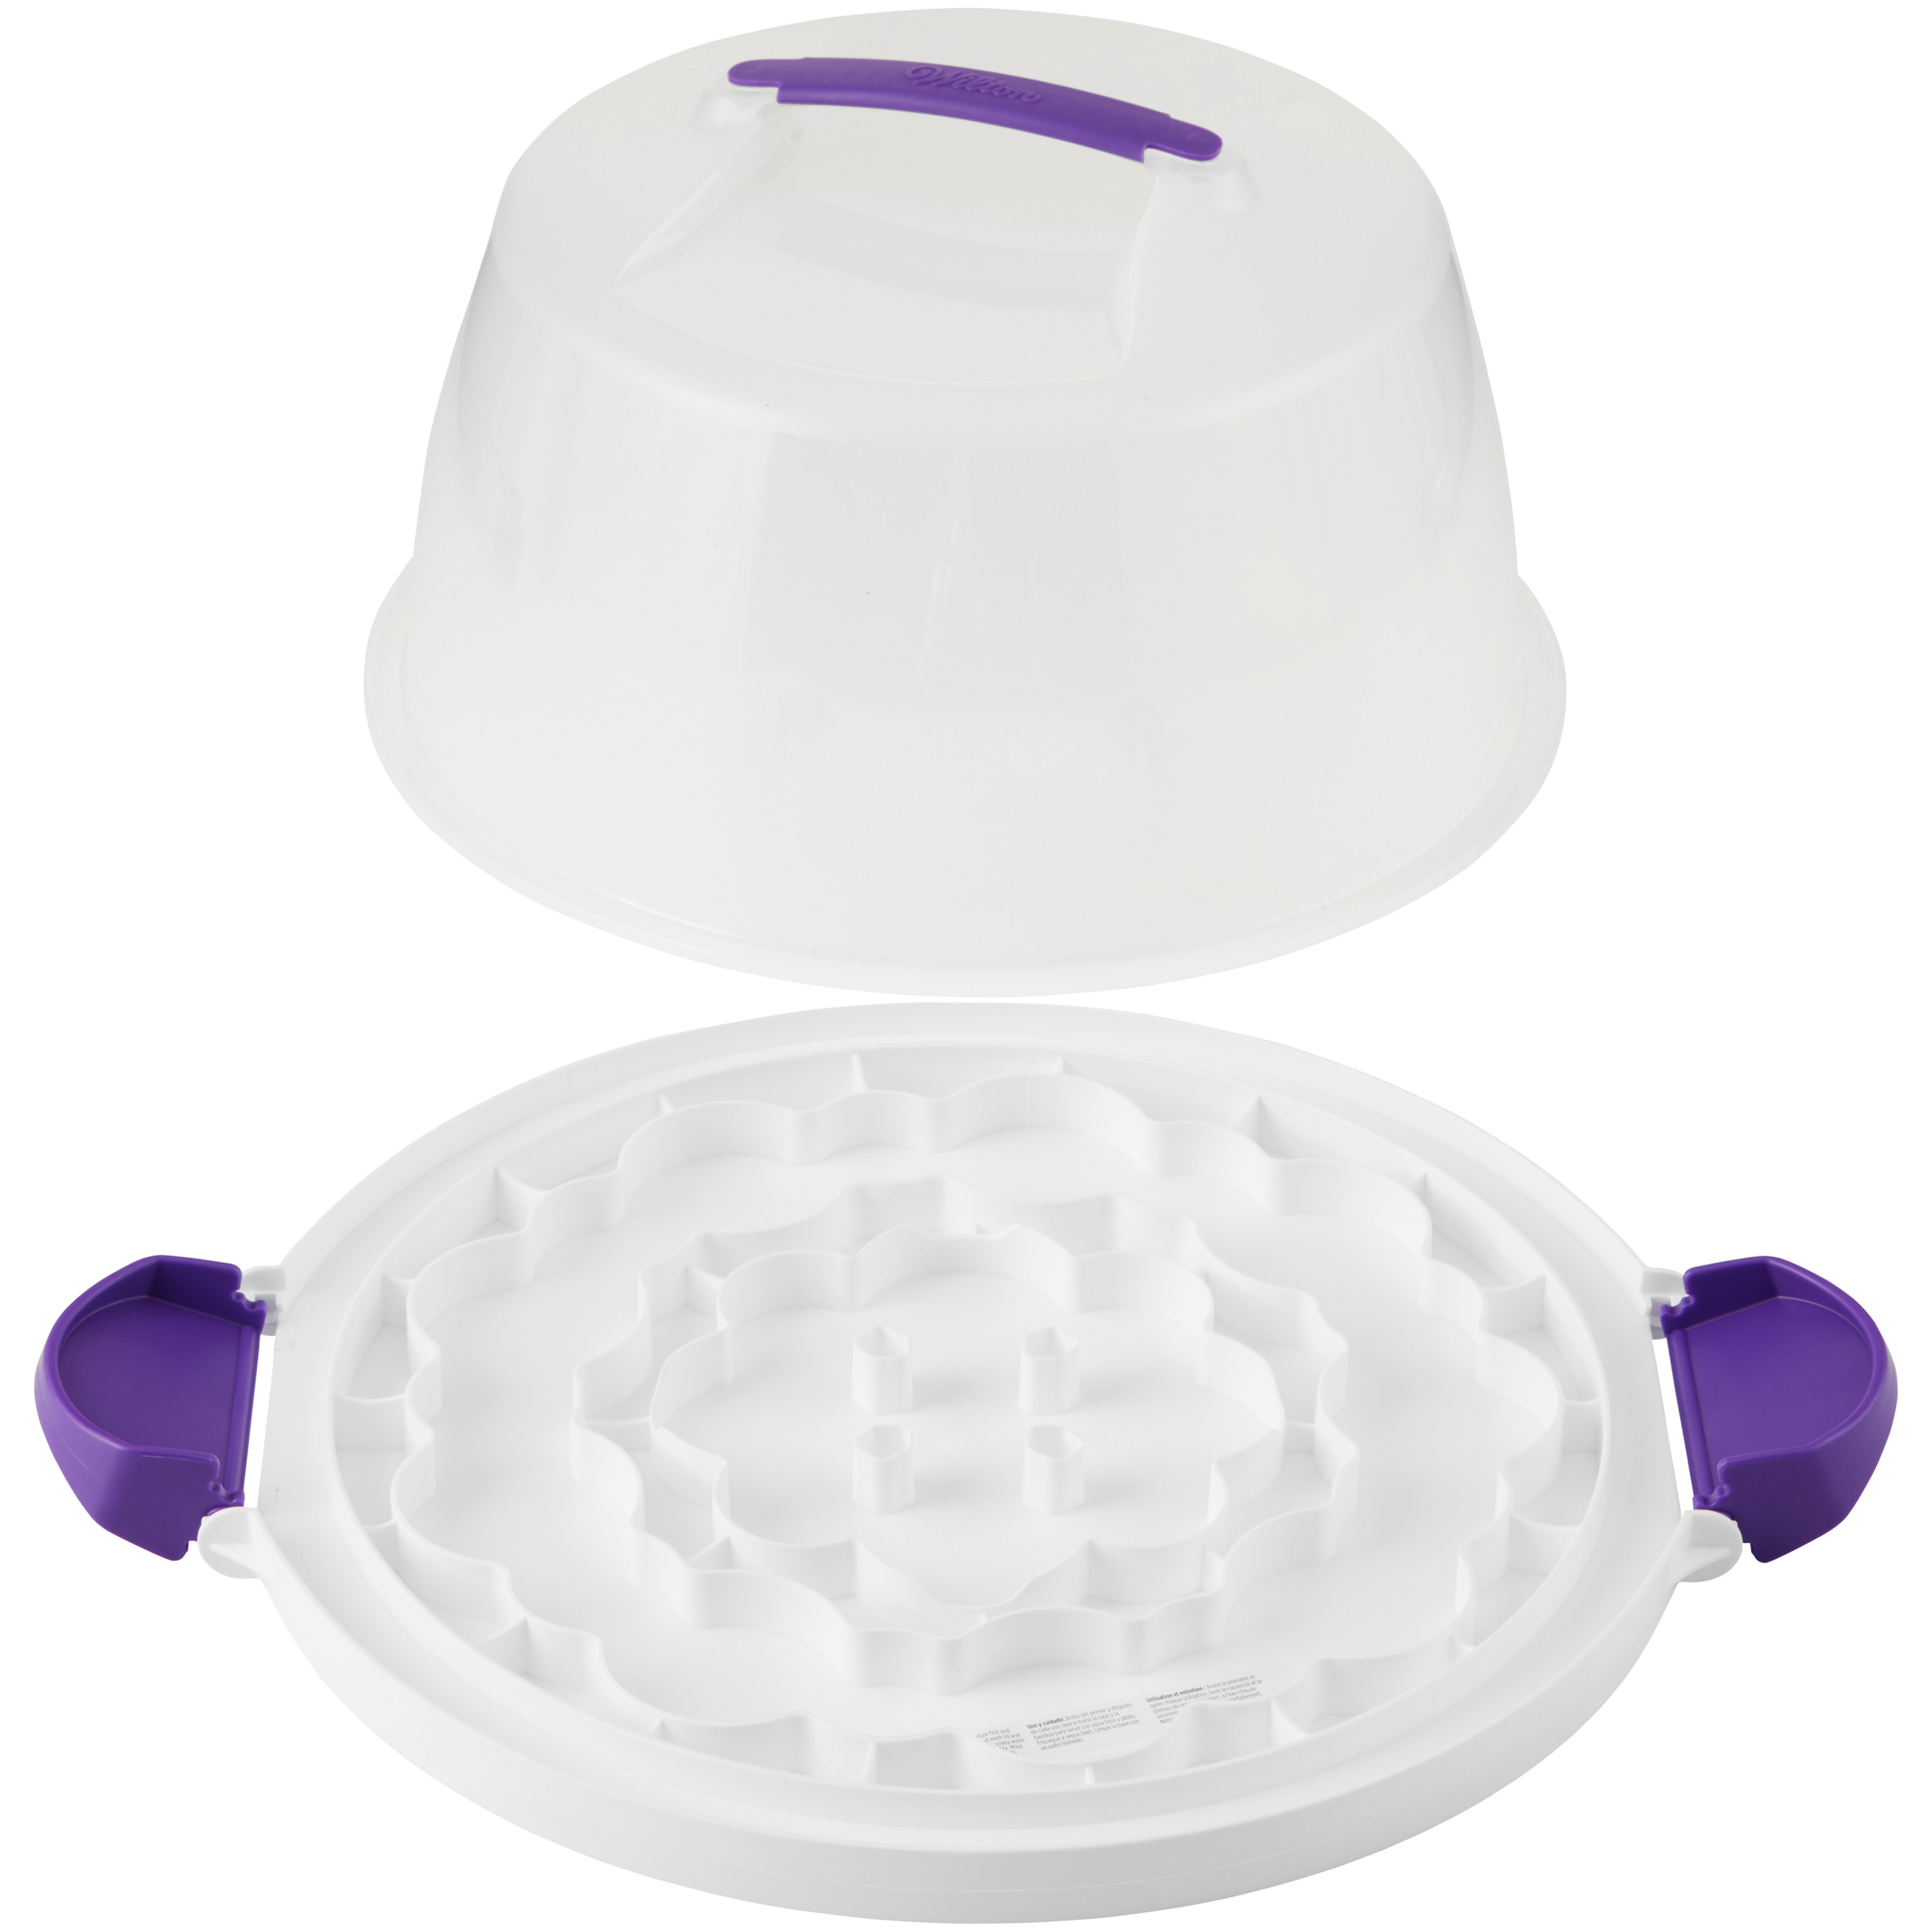 Wilton Cake and Cupcake Carrier, Fits 10 inch Cake or 13 Standard Cupcakes, 2.07 oz. - image 4 of 5